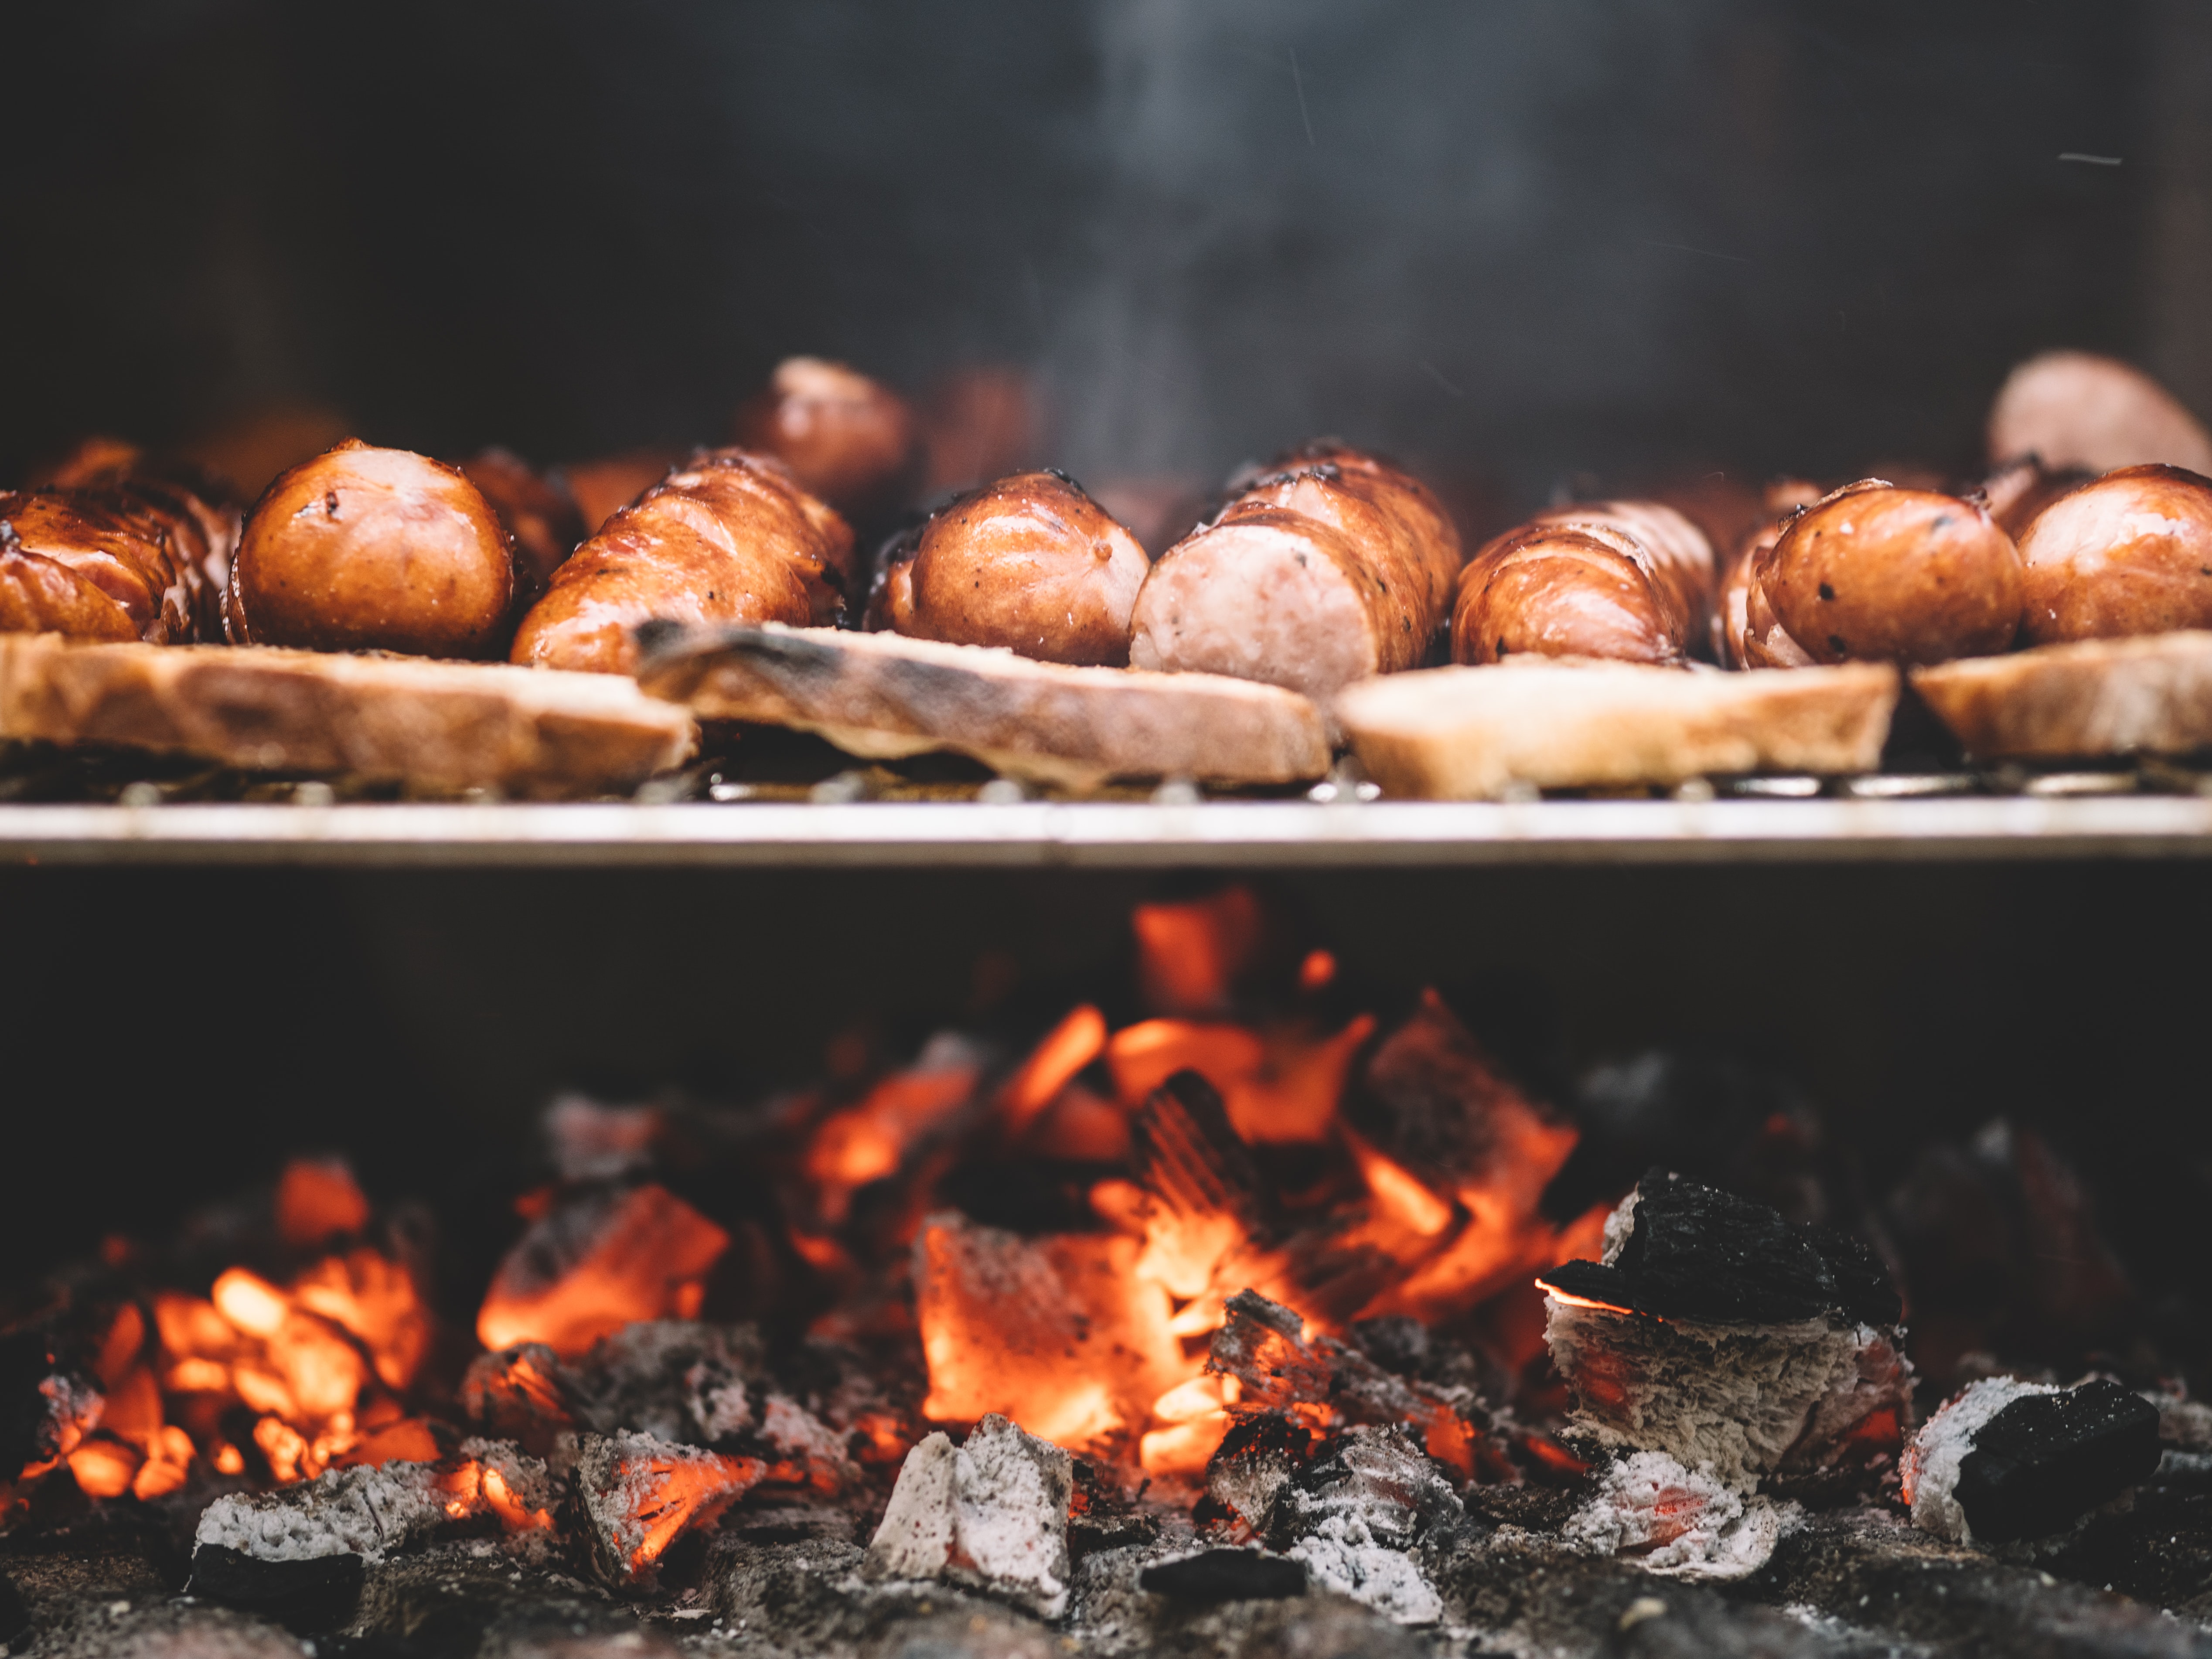 Sausages cooking over wood chips on a grill 